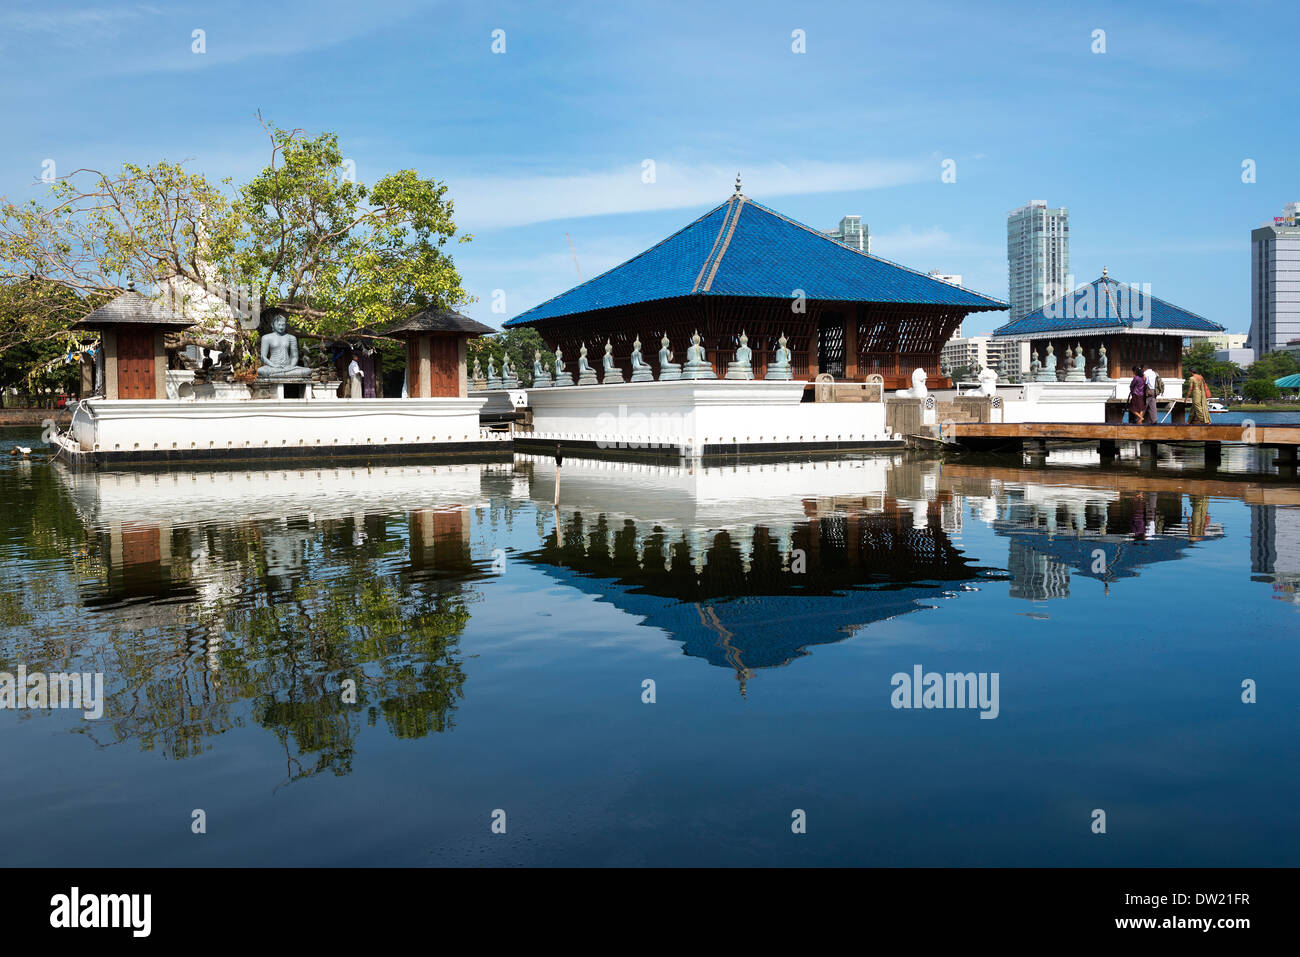 The ‘seema malaka Temple’ - an assembly hall for monks in the picturesque Beira Lake, designed by famous architect Geoffrey Bawa Stock Photo